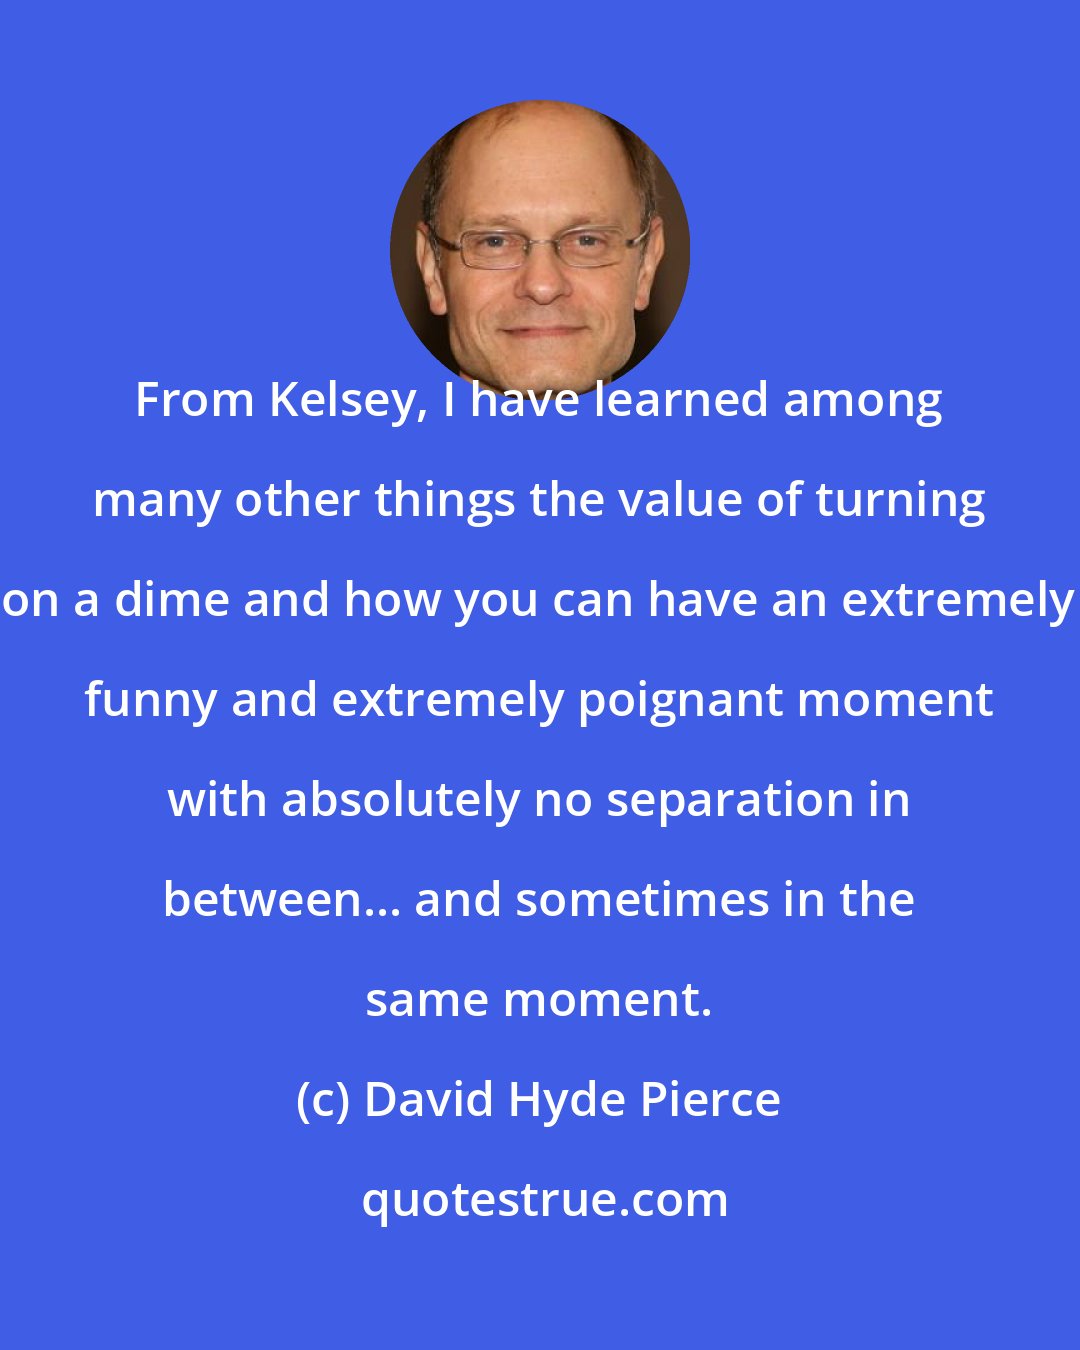 David Hyde Pierce: From Kelsey, I have learned among many other things the value of turning on a dime and how you can have an extremely funny and extremely poignant moment with absolutely no separation in between... and sometimes in the same moment.